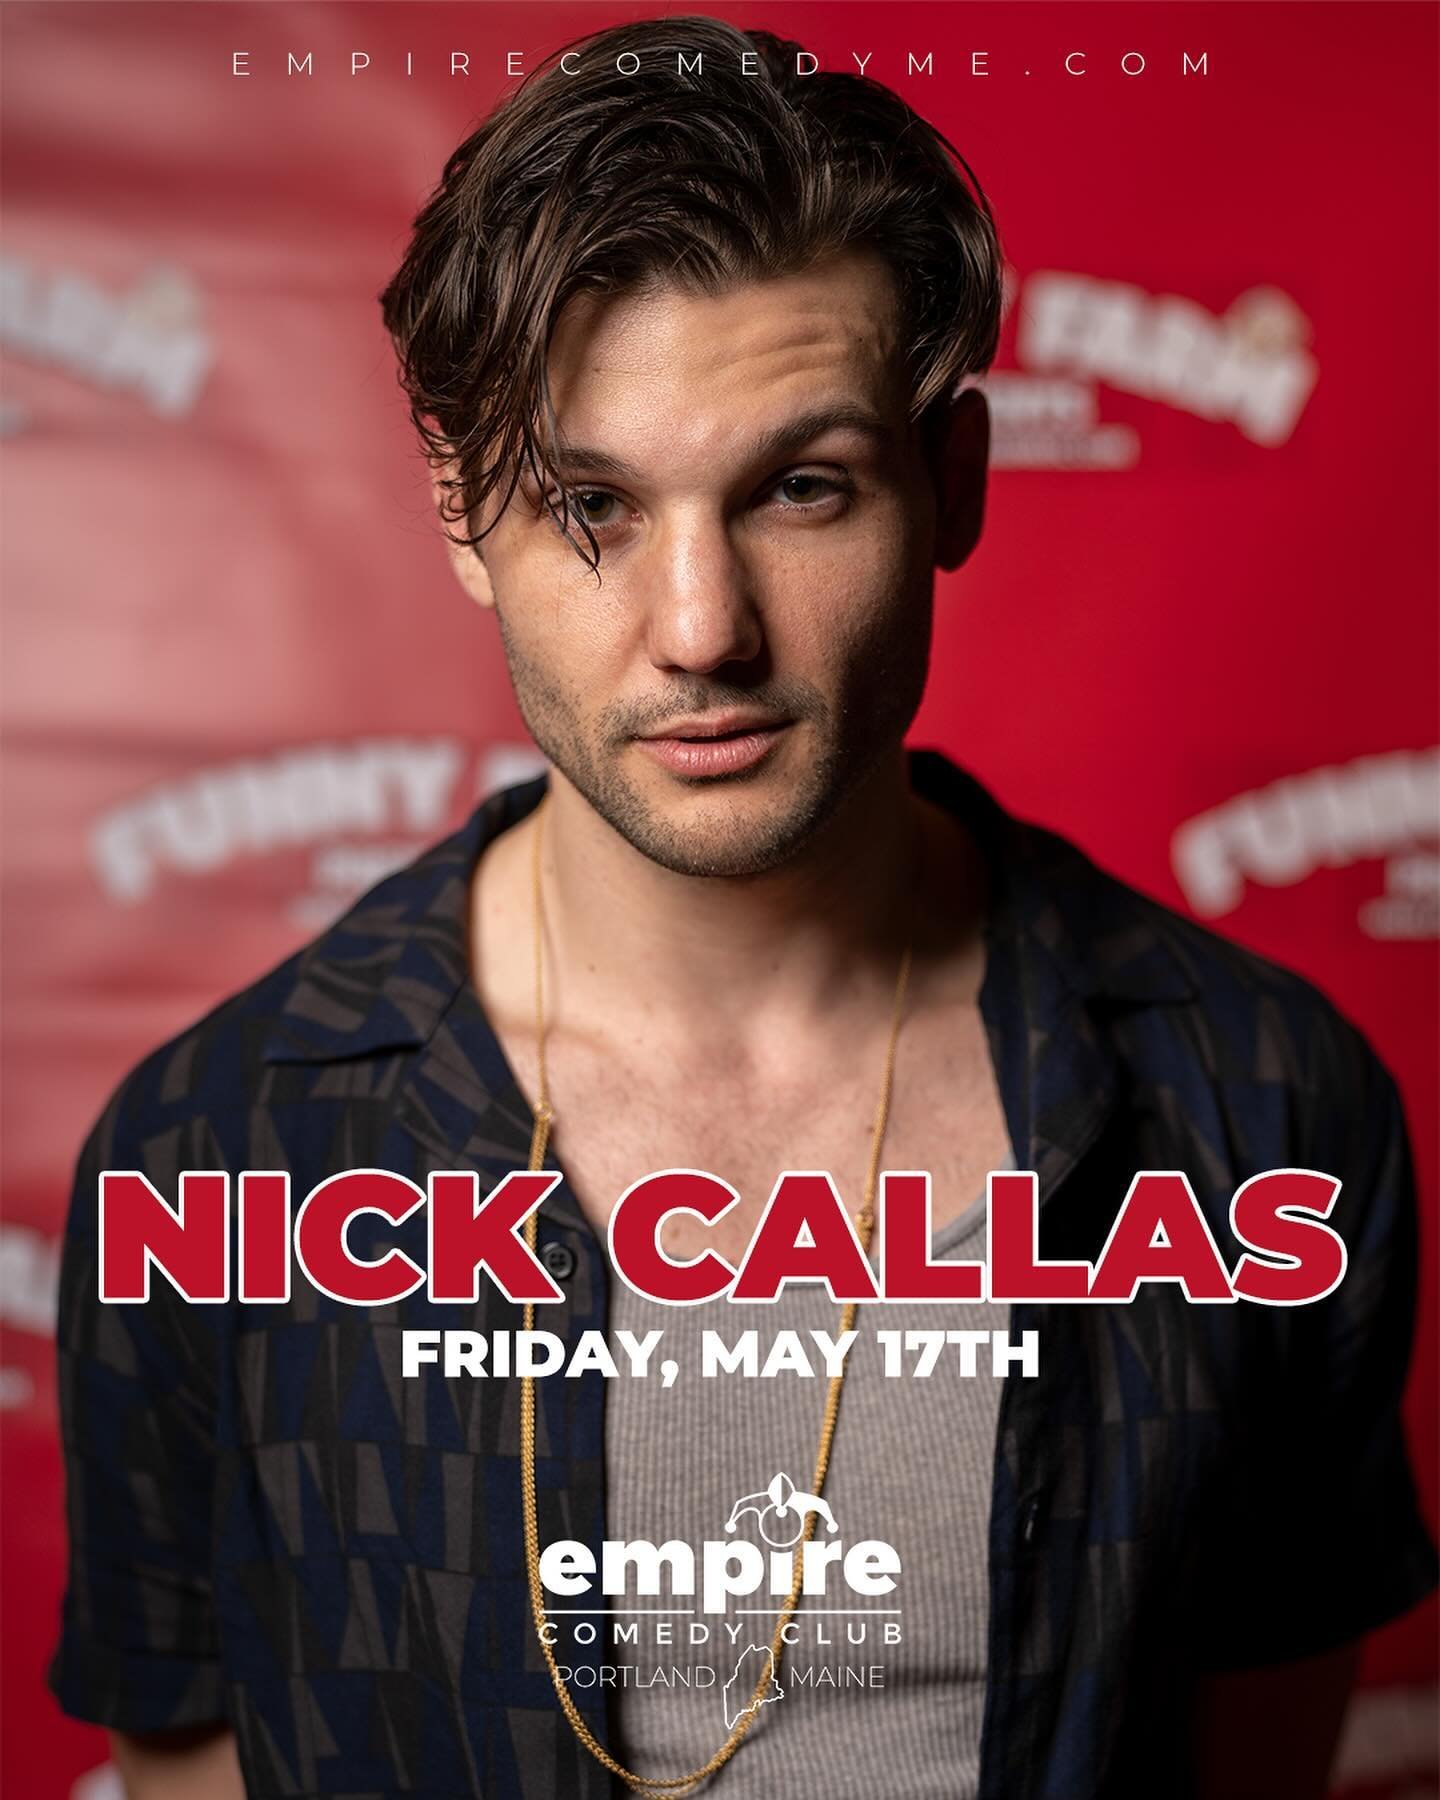 TONIGHT! FRI MAY 17th! Two shows!! At 7pm we have Nick Callas headlining, followed by our late show, Last Call Showcase at 9:30pm!  Get your tickets!  Doors at 6pm! 
Tickets @ link in bio 🎟️
&bull;
#empirecomedyclub #comedyclub #maine #portlandmaine